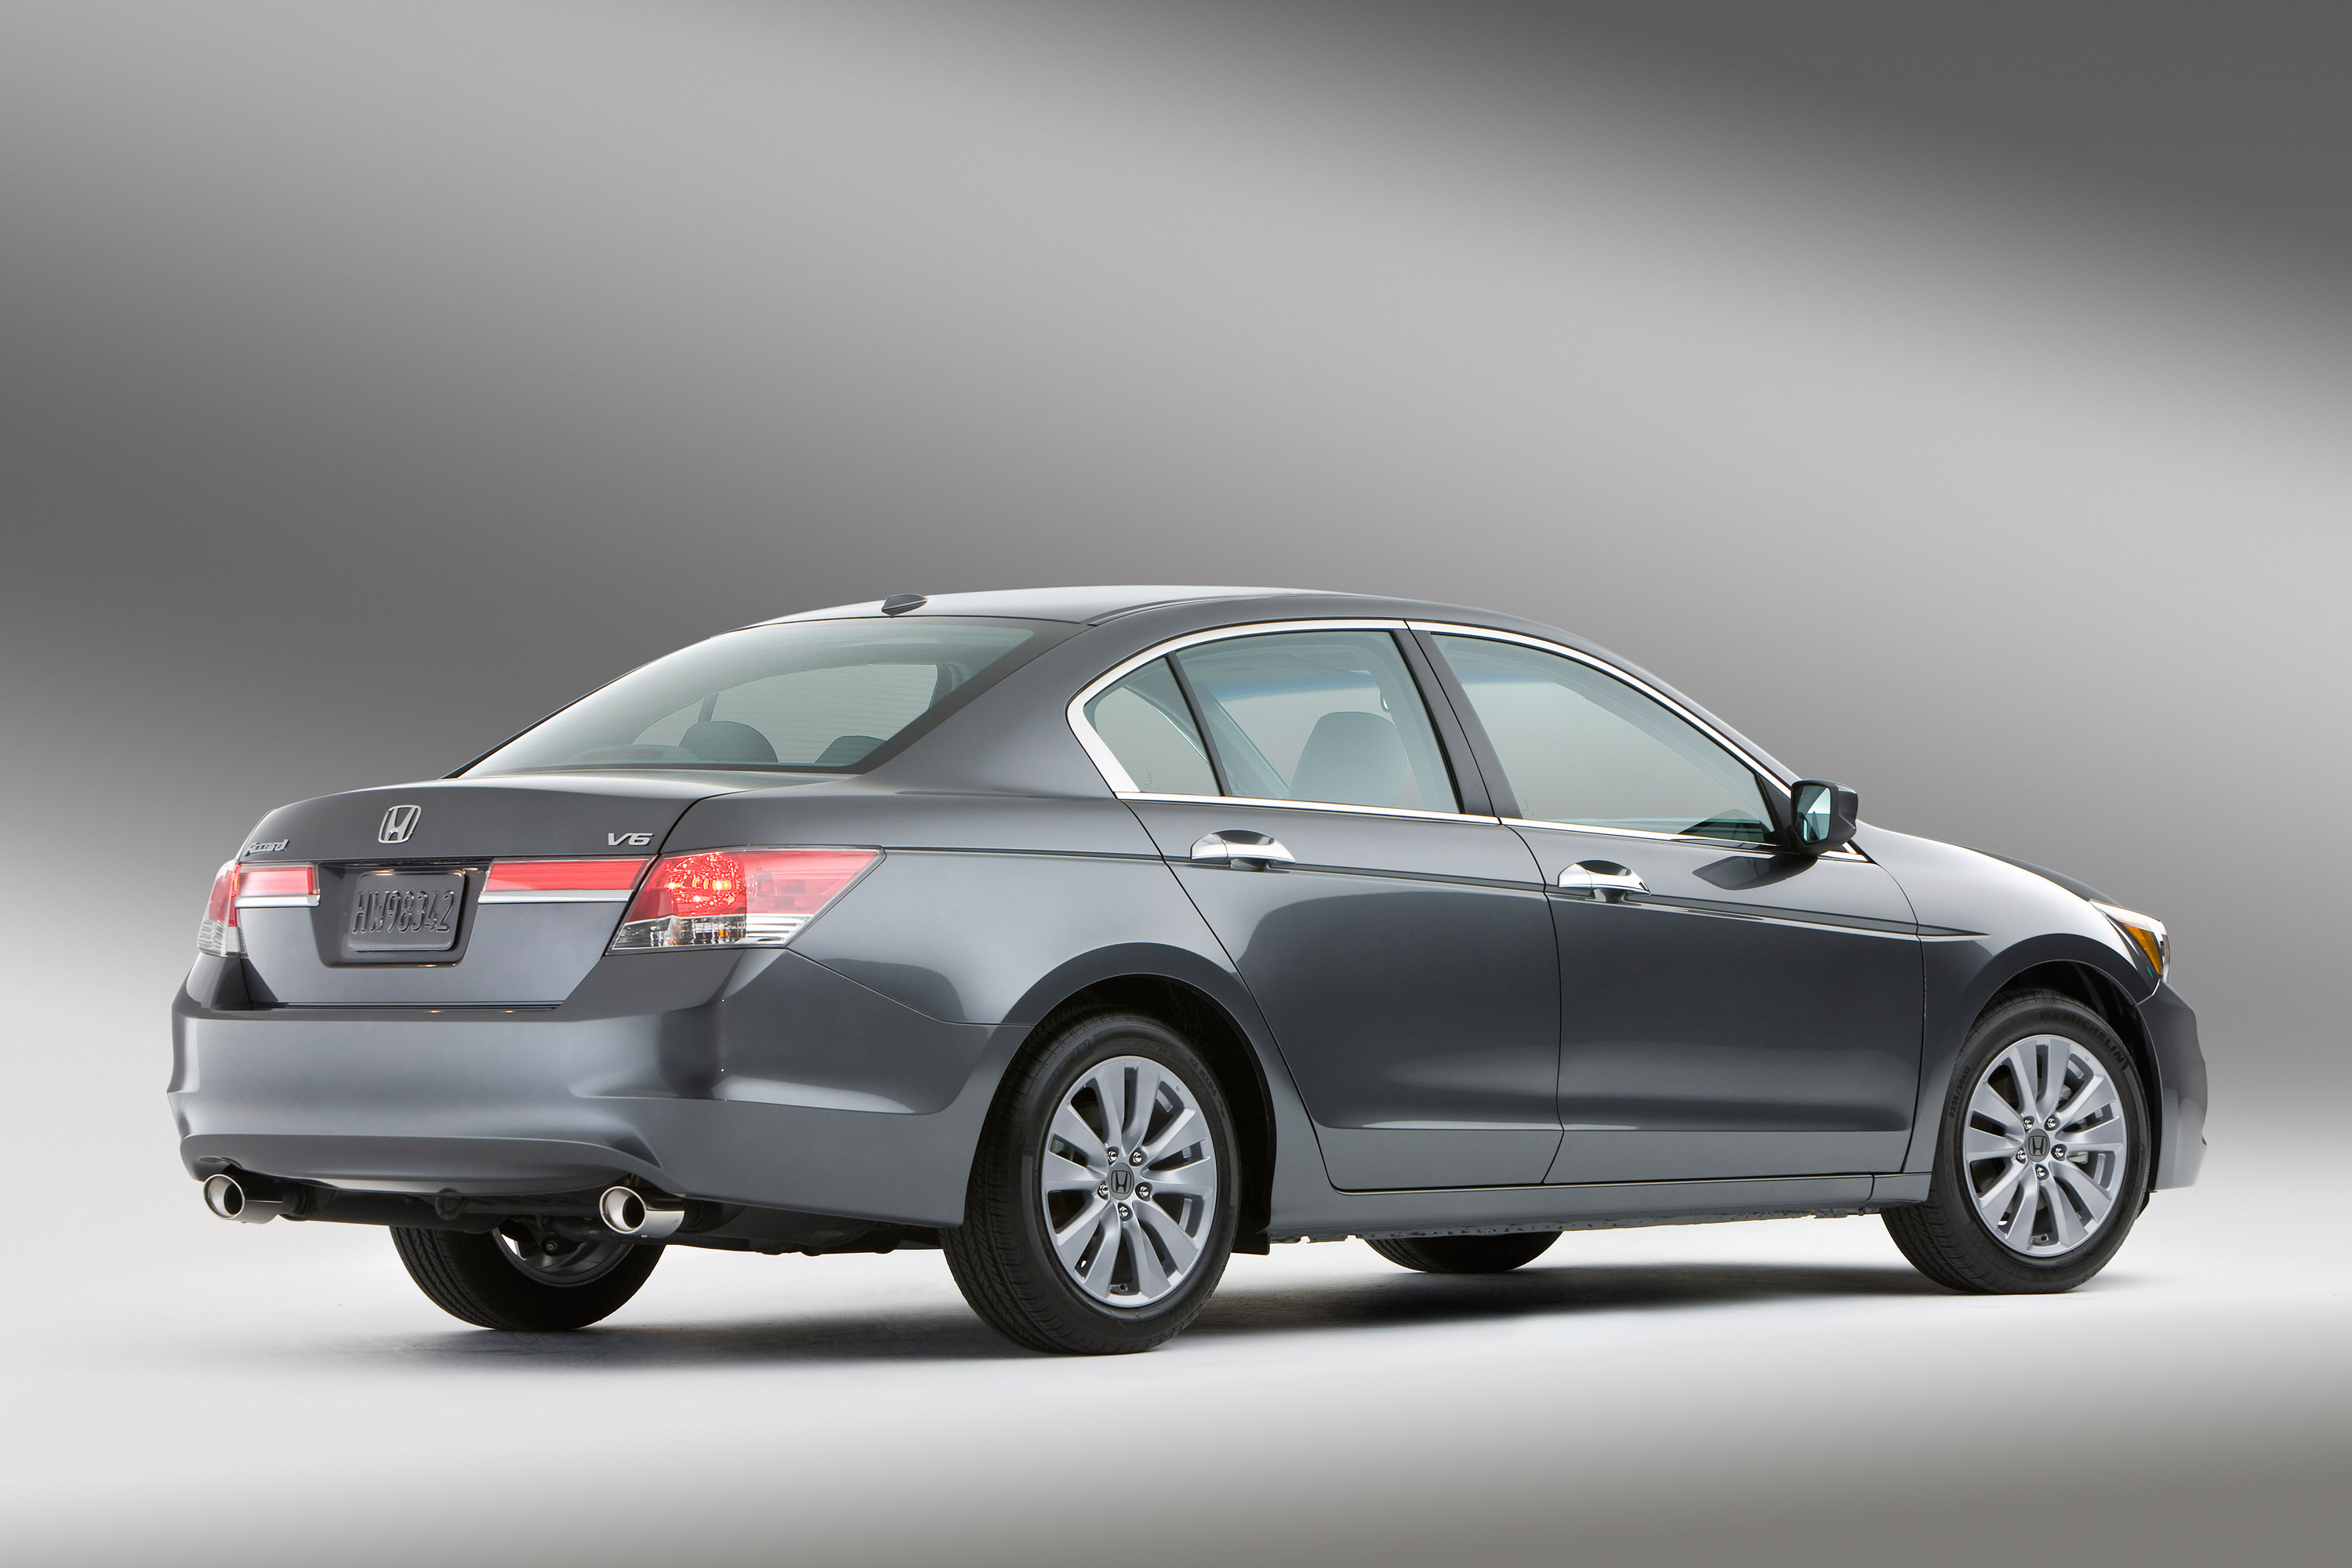 Honda restyles the Accord for 2011